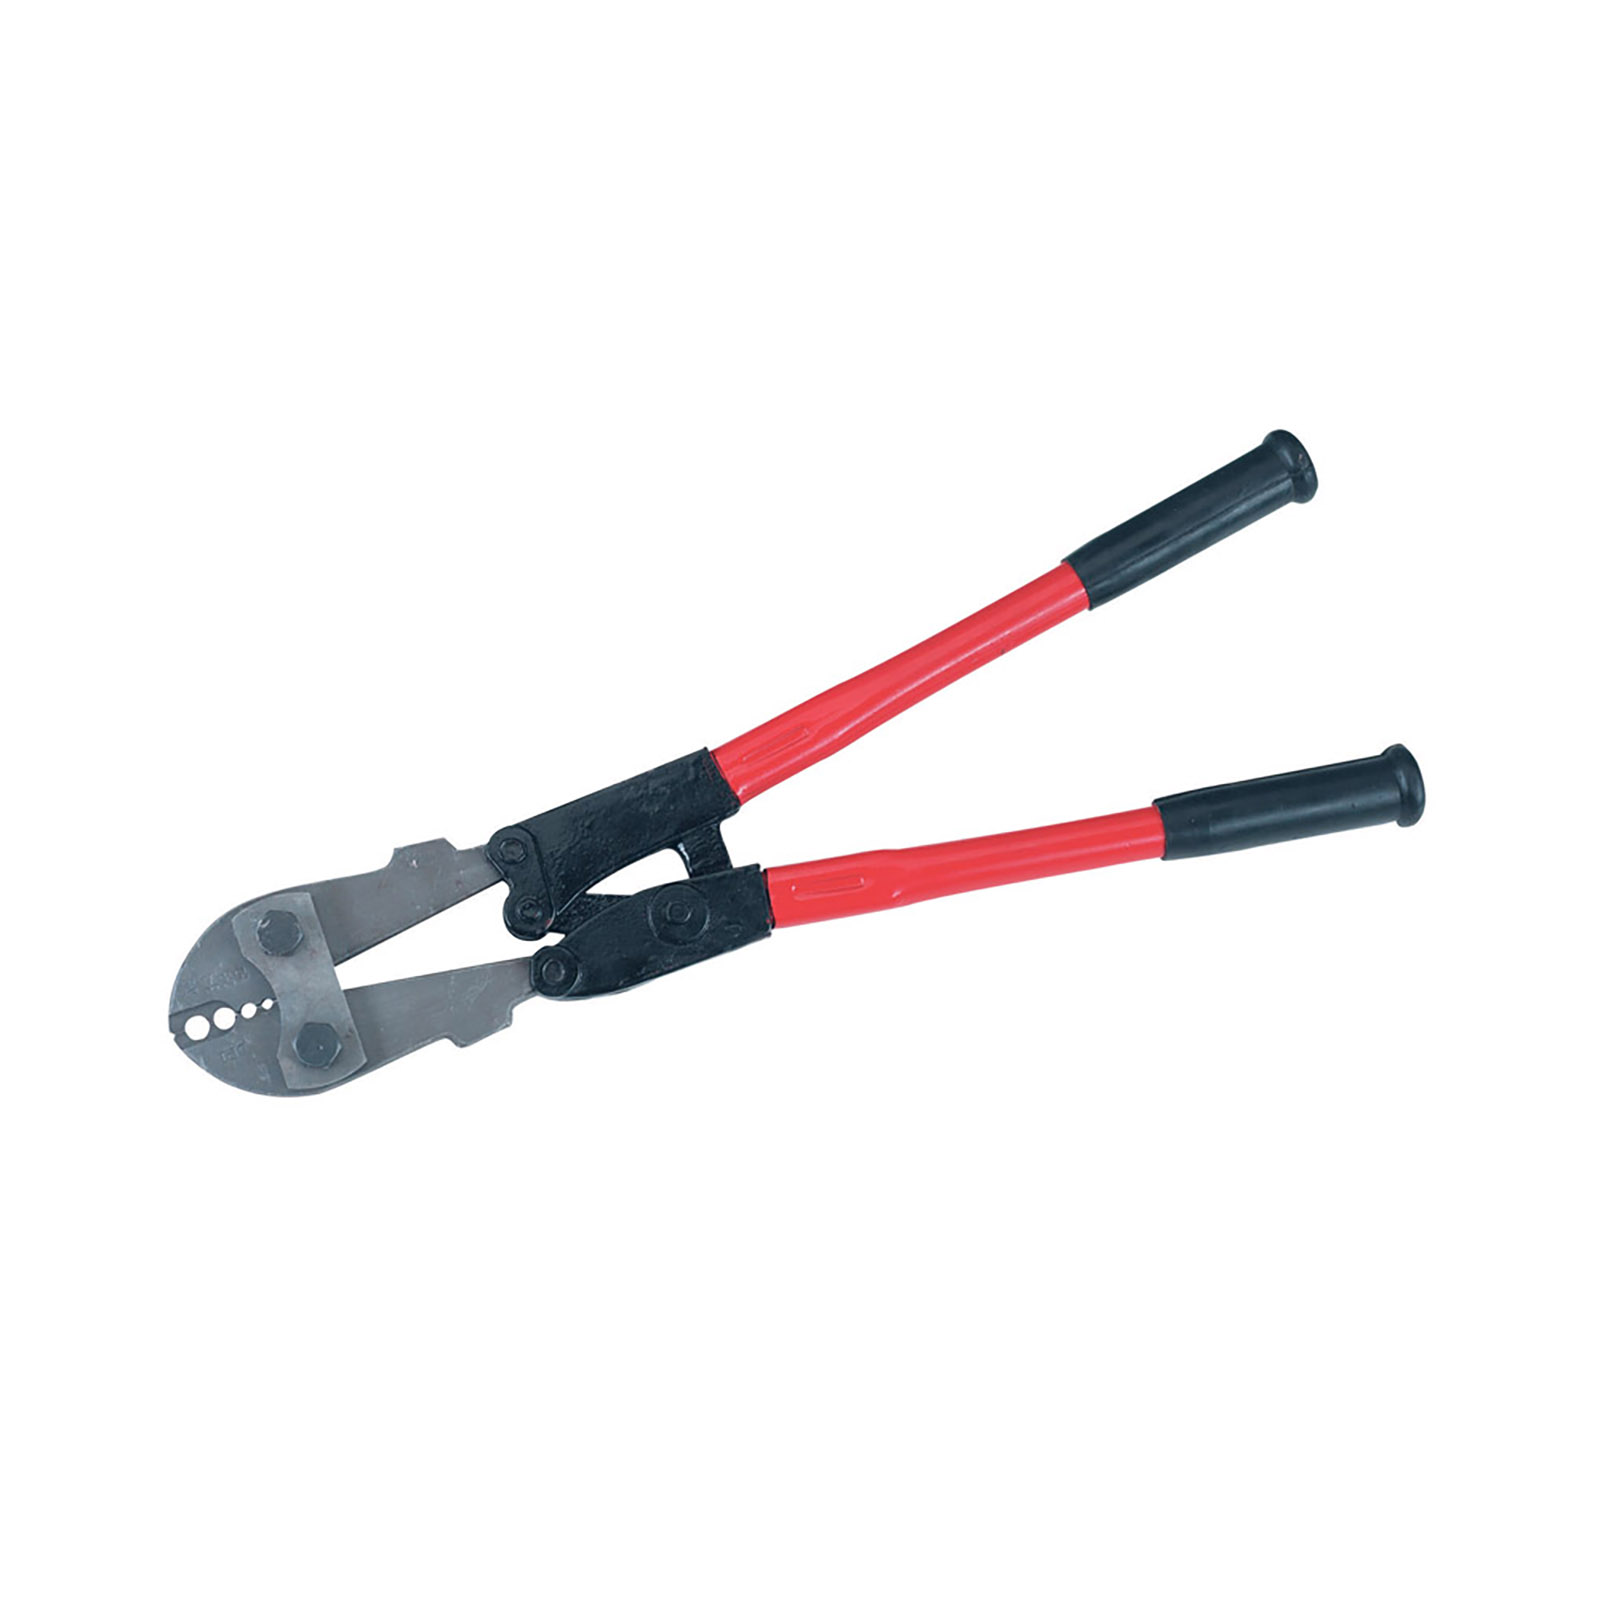 Dare Splicing and Crimping Tool for Nicopress Sleeves & Taps